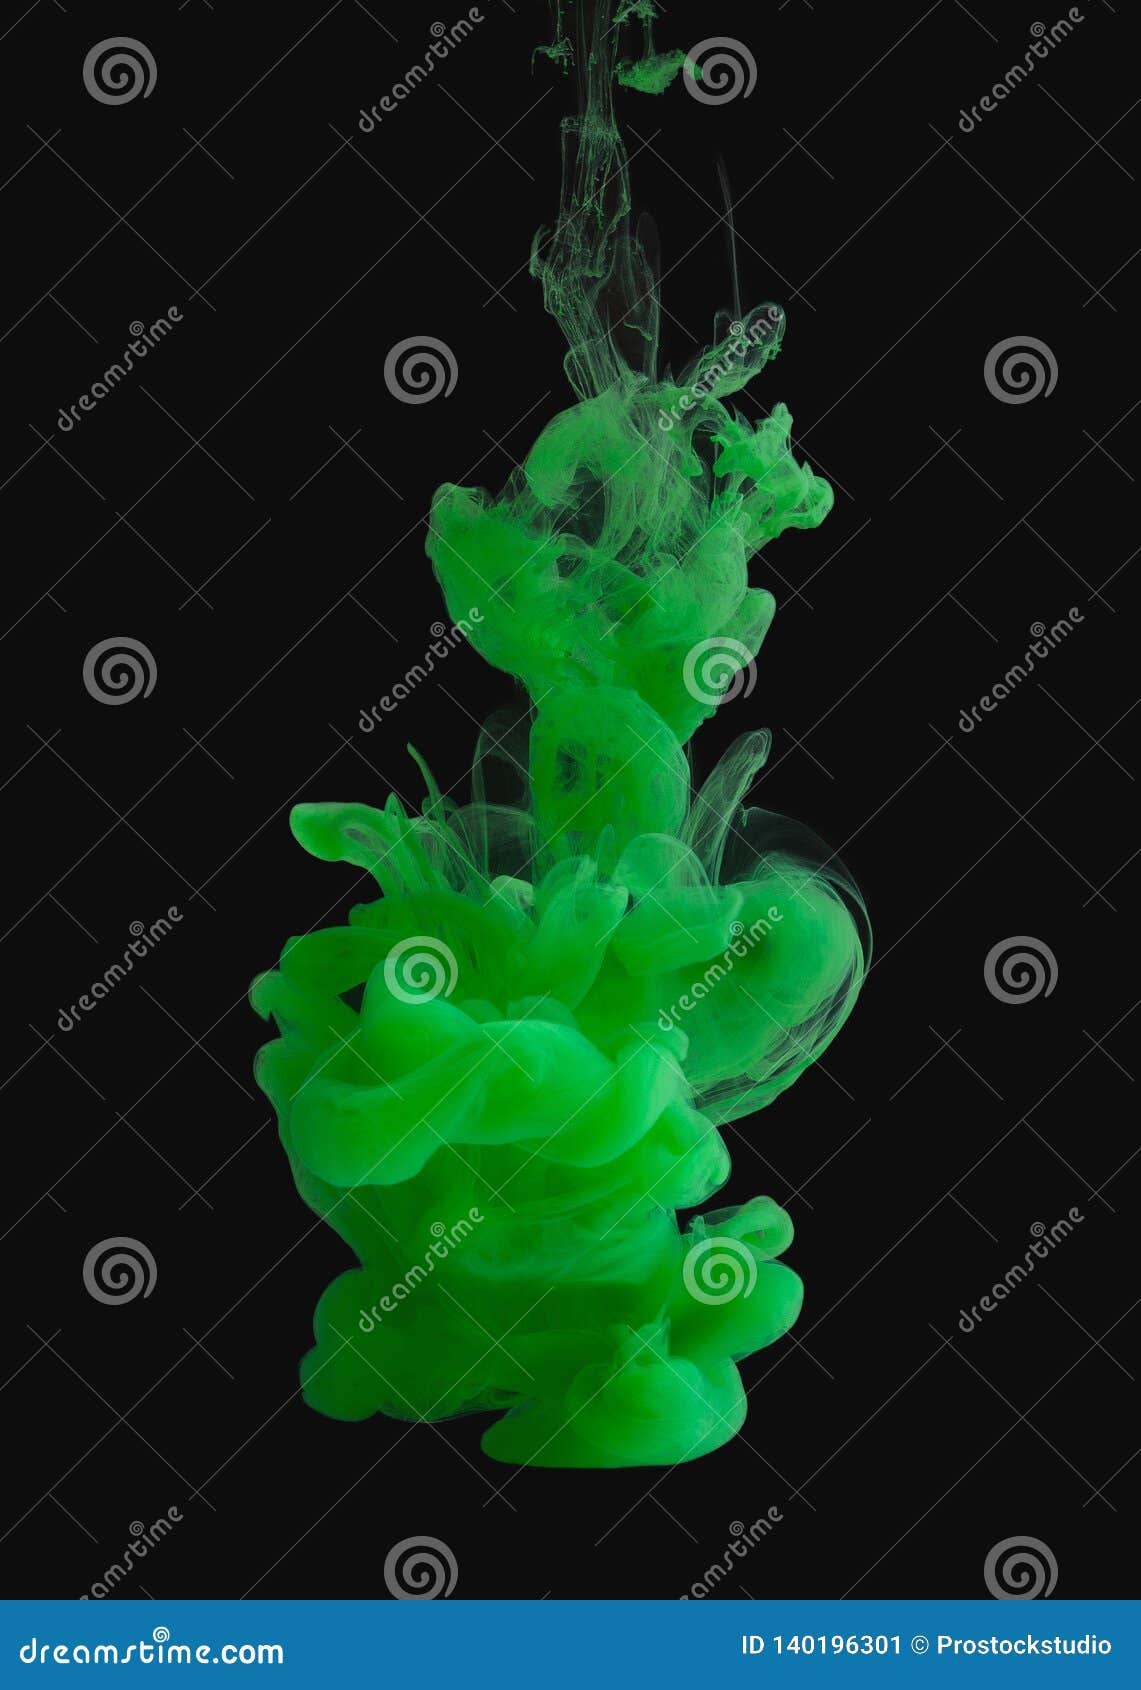 Green Paint Splash Cloud in Water, Isolated on Black Stock Image ...